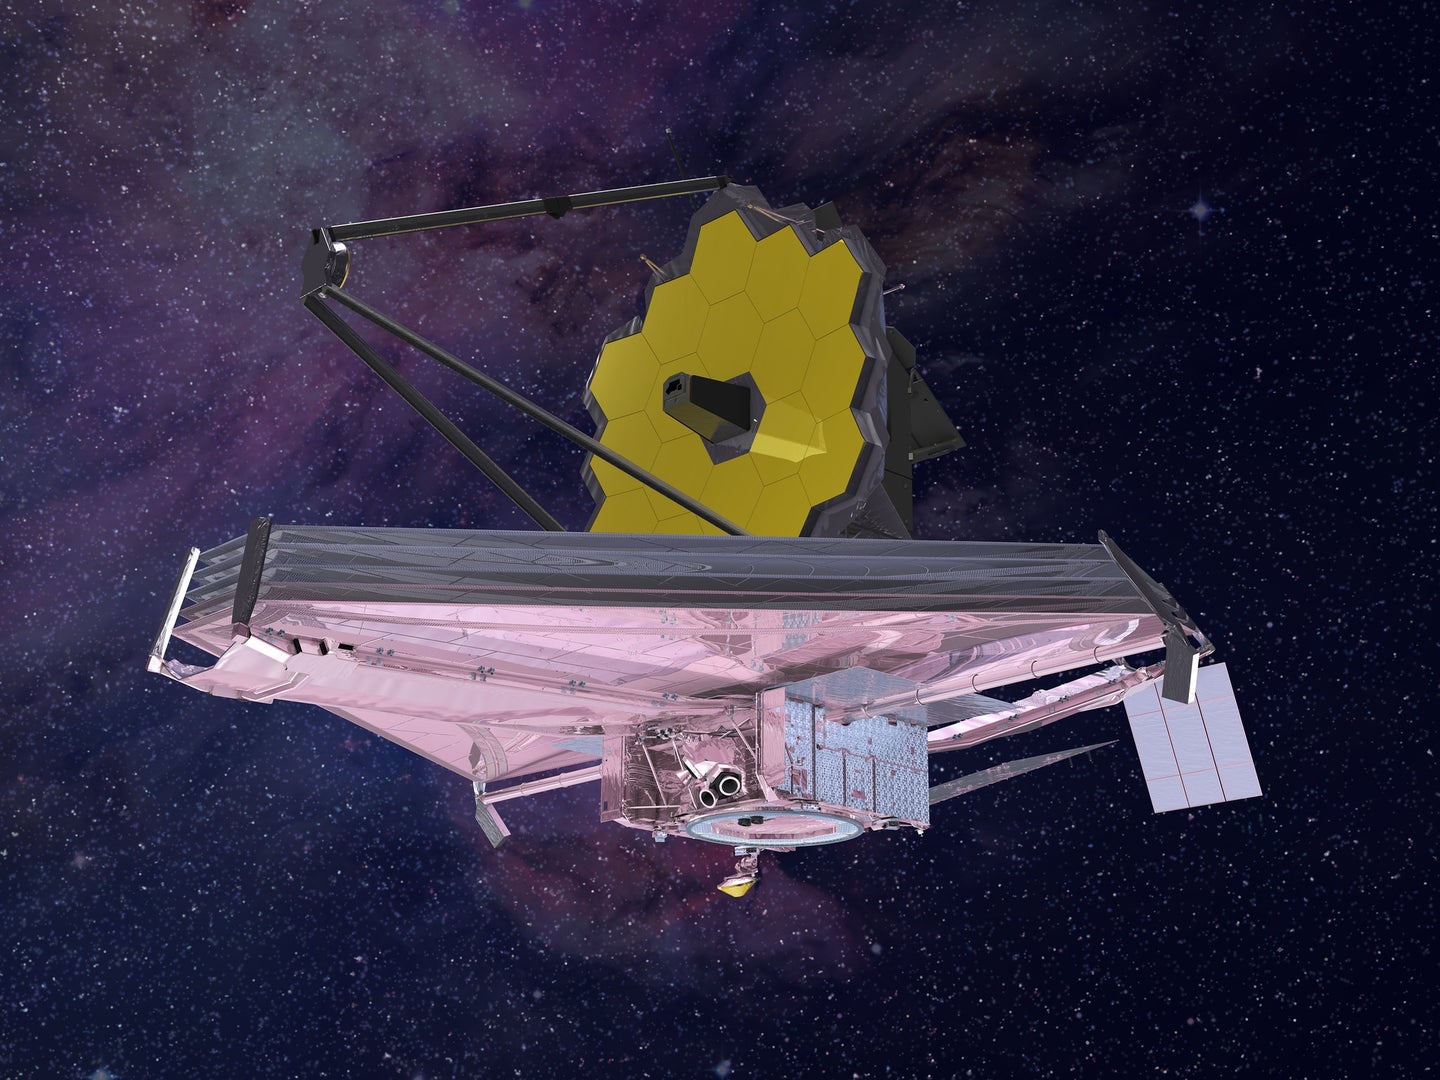 An artist's impression of the James Webb Space Telescope, finally set to launch this year.